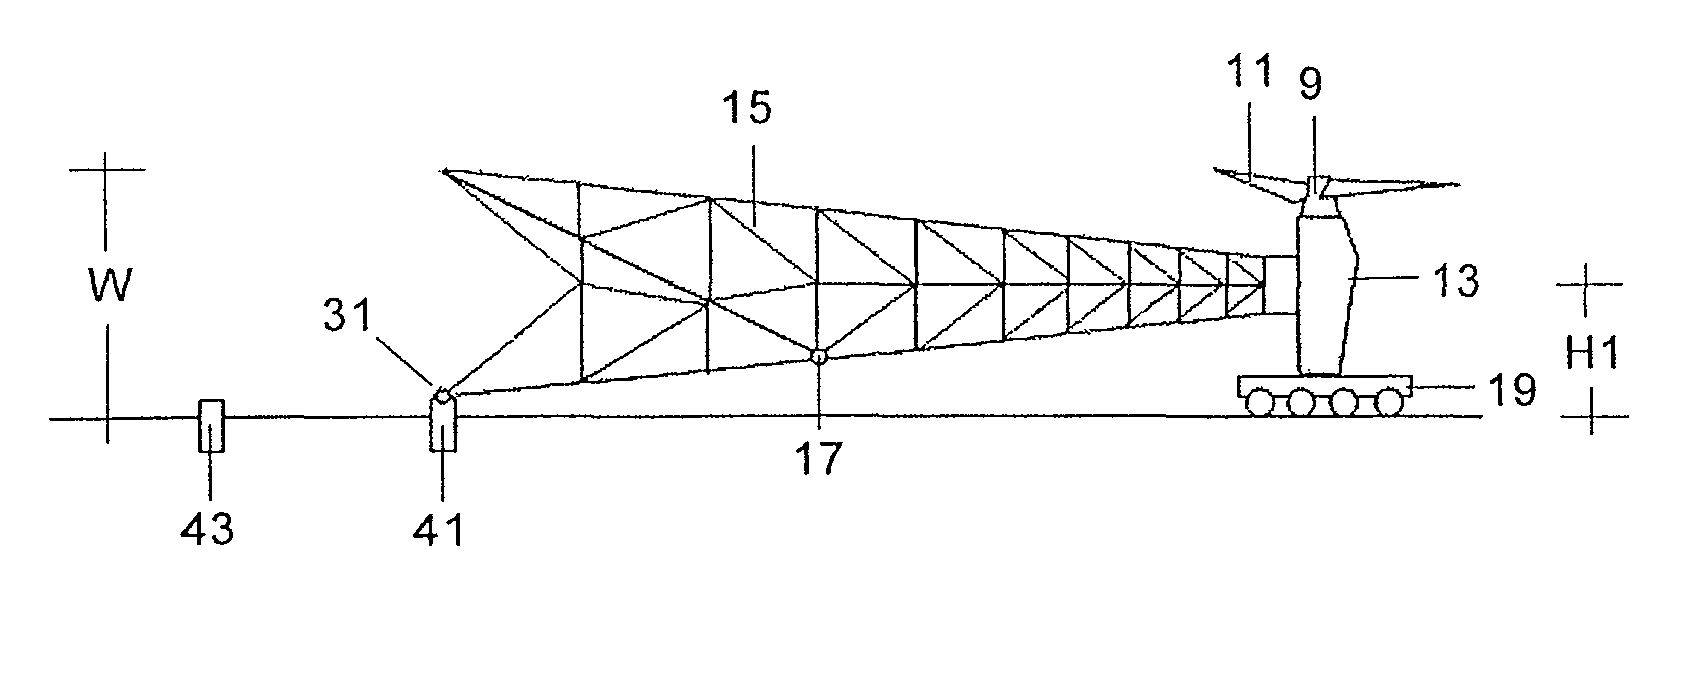 Lattice tower and an erection method for a wind turbine with a lattice tower